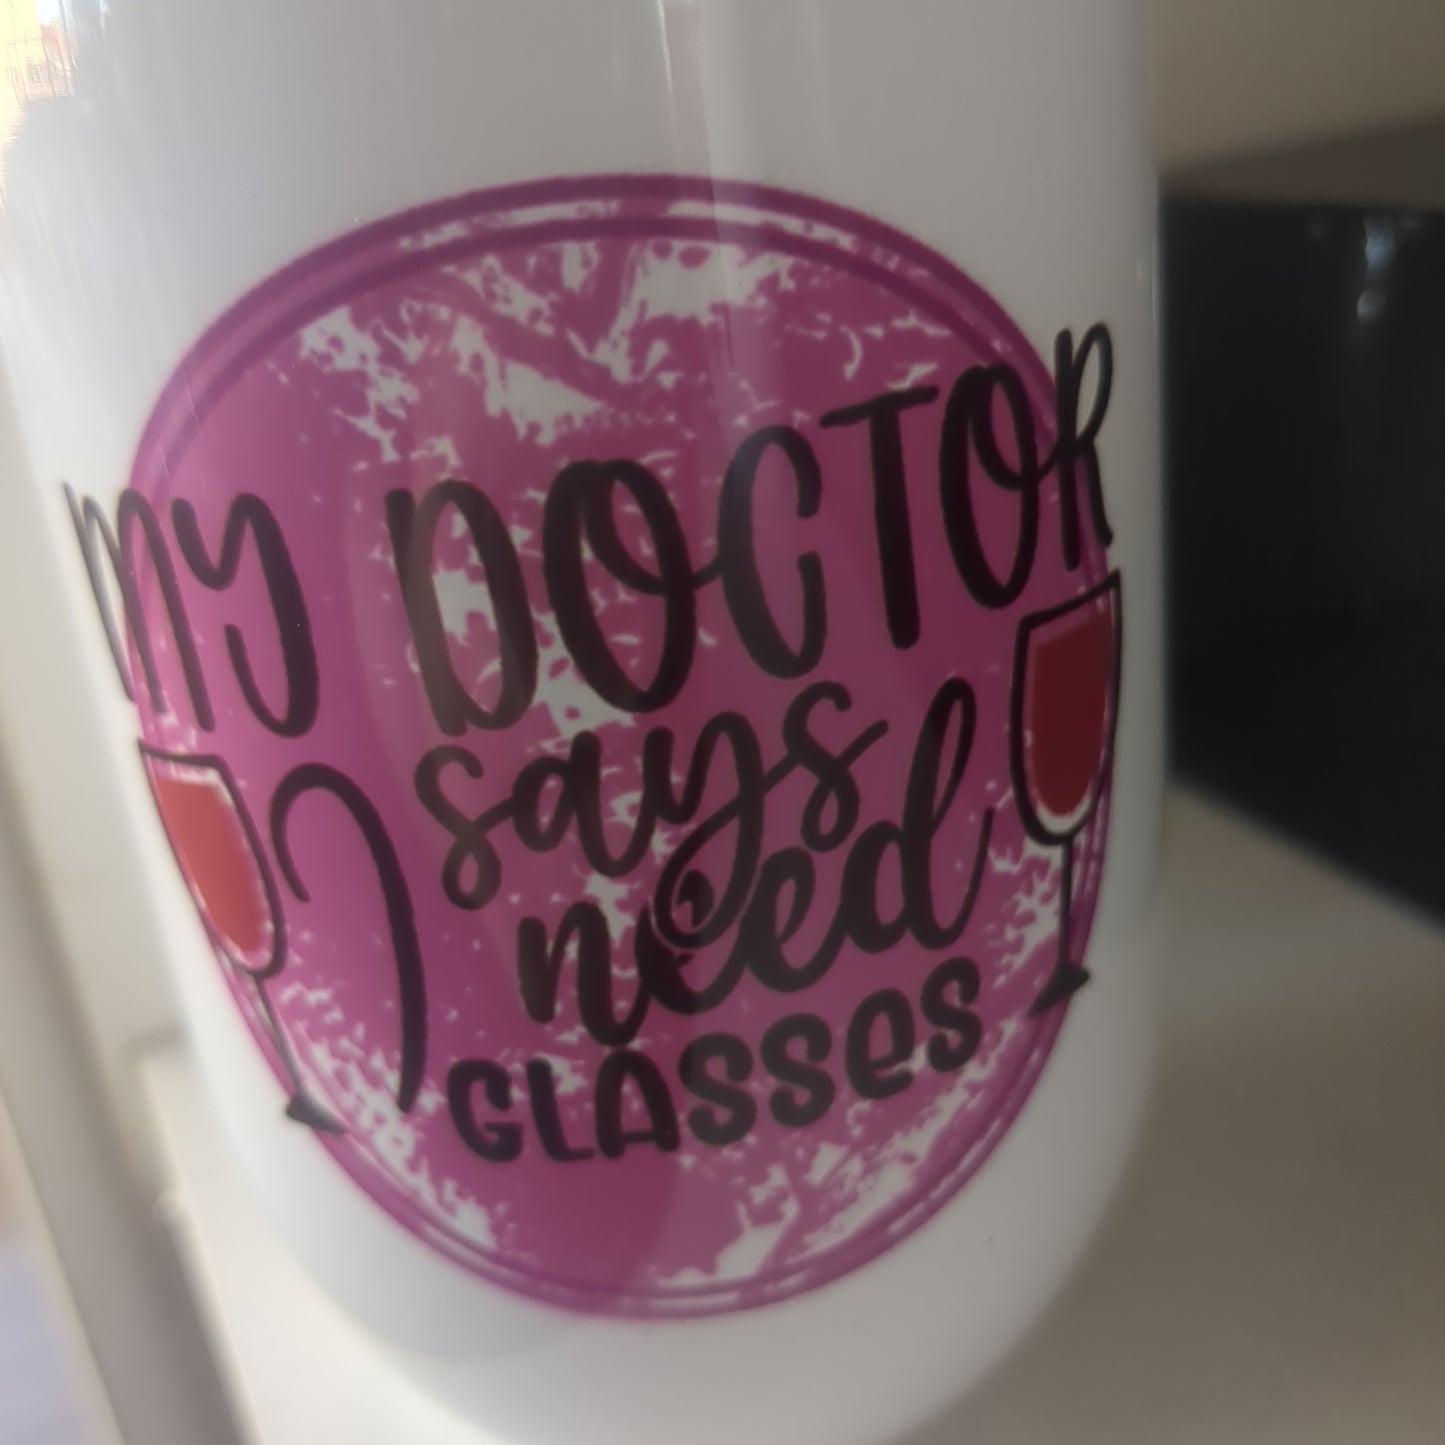 12 Oz stainles steel wine tumbler My Doctor Says I Need Glasses